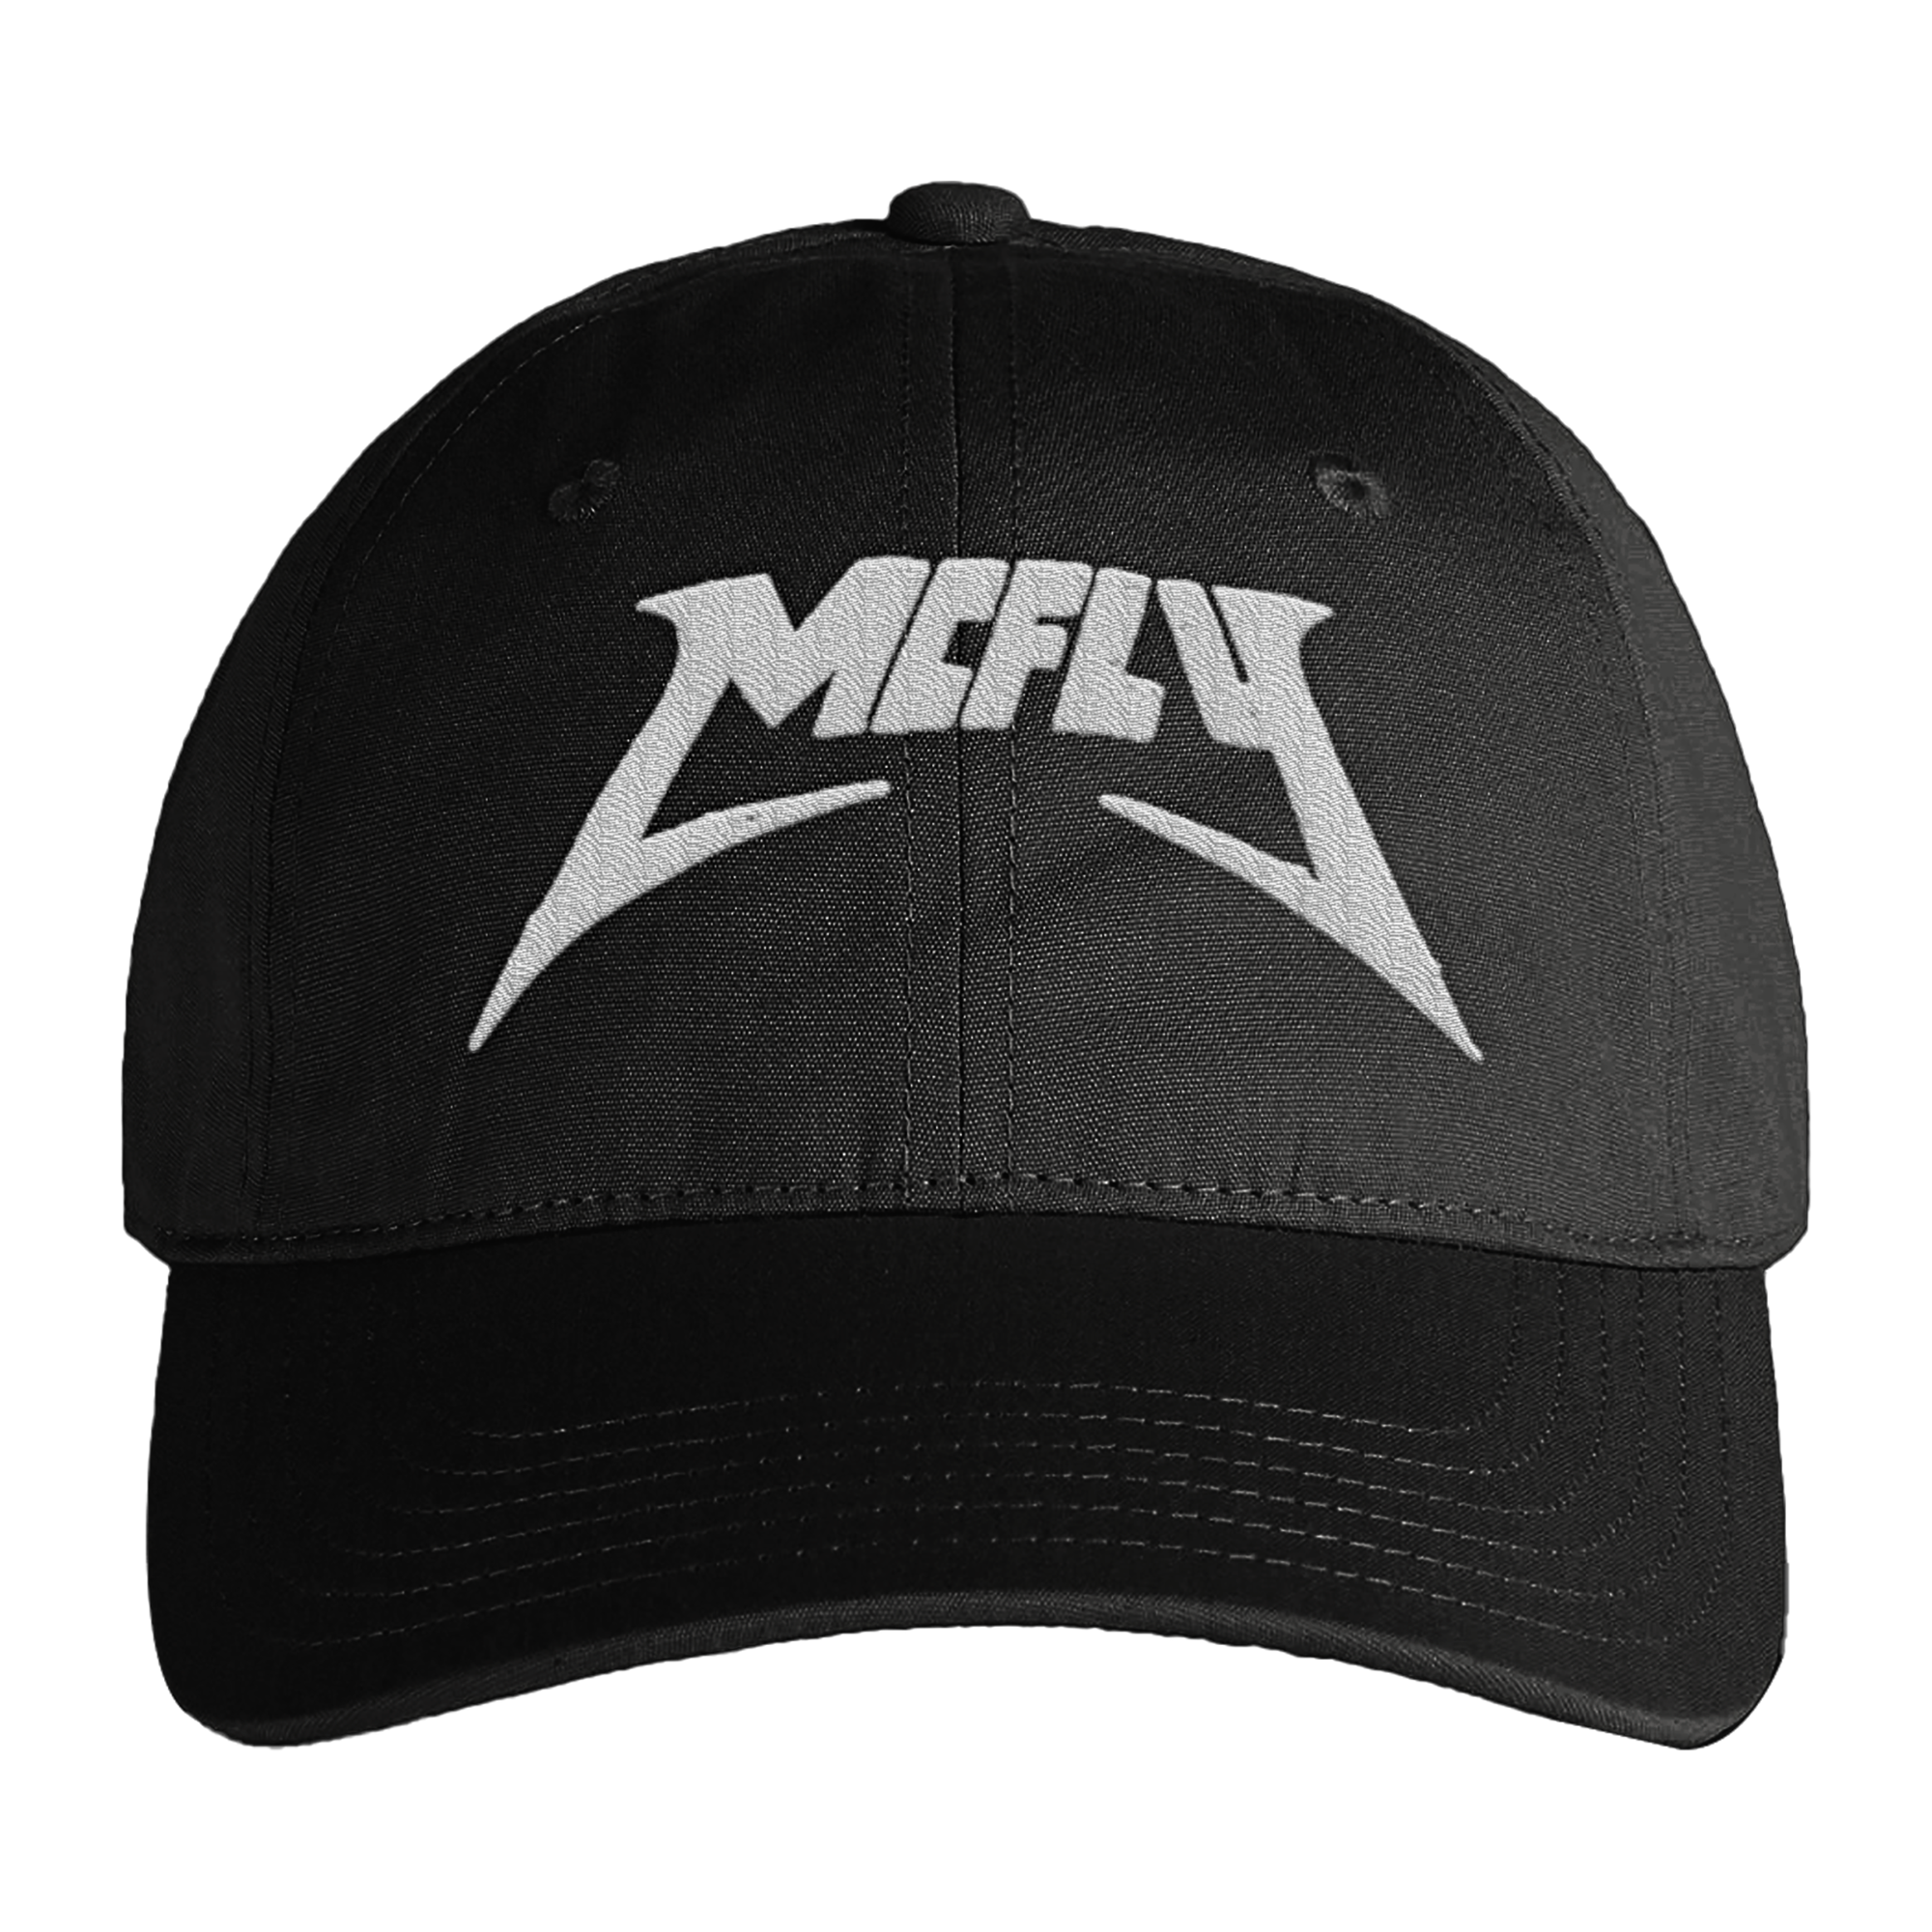 Power To Play | McFly Cap